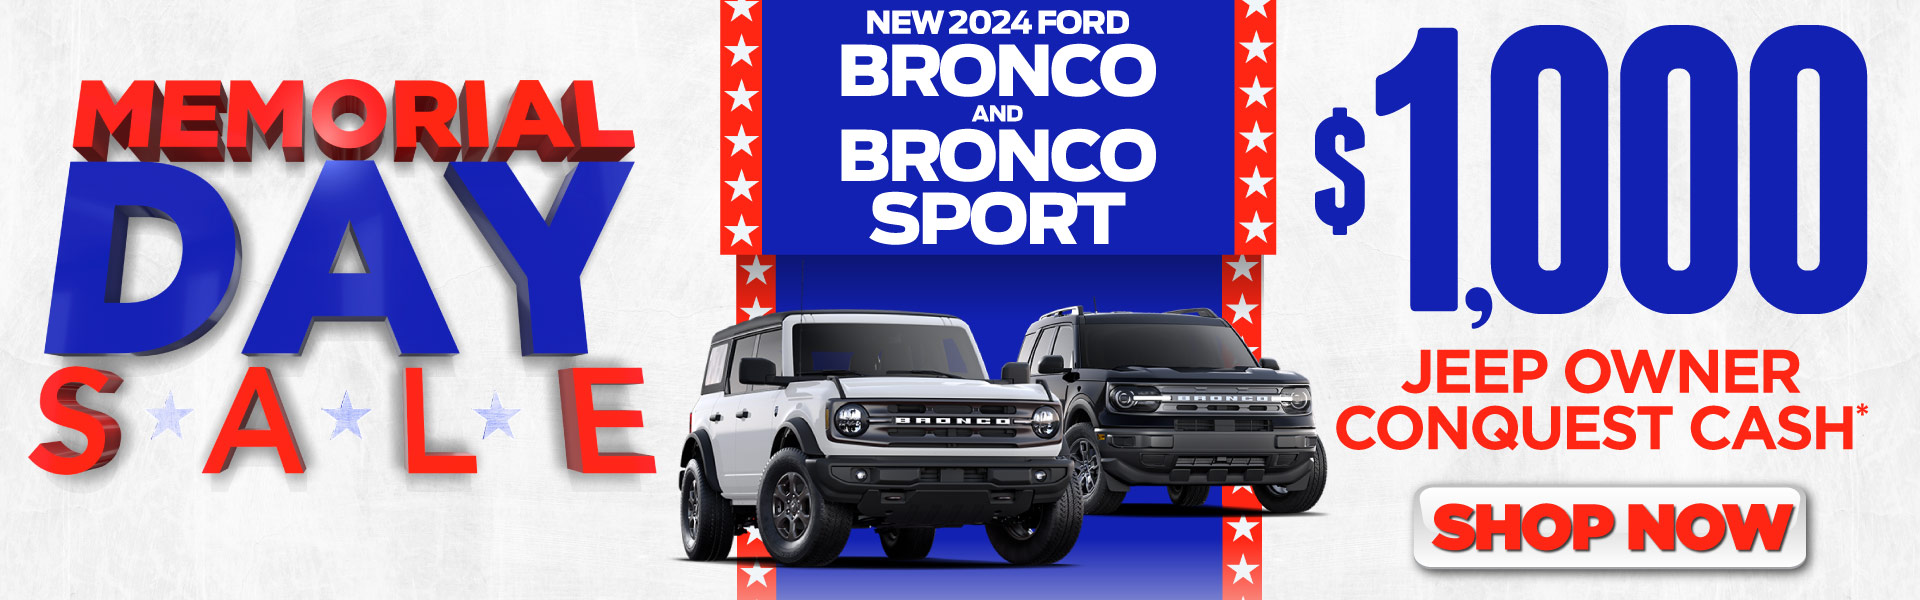 2024 ford escape 2.9% apr for 60 months | act now